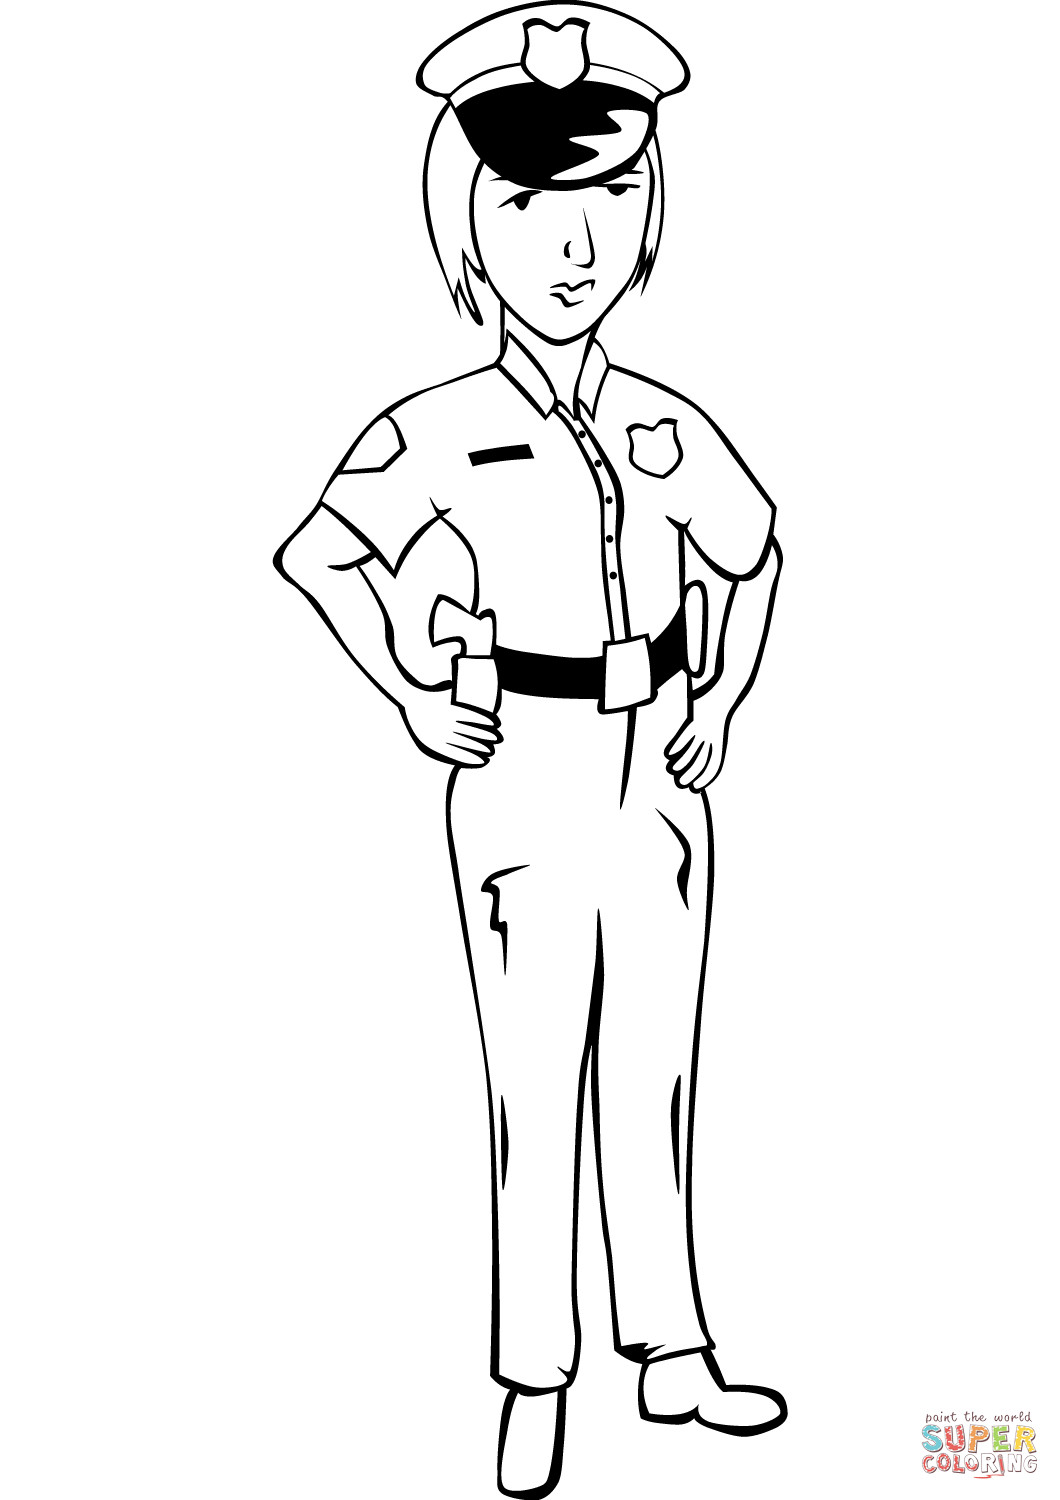 Police Officer Coloring Pages
 Woman Police ficer coloring page